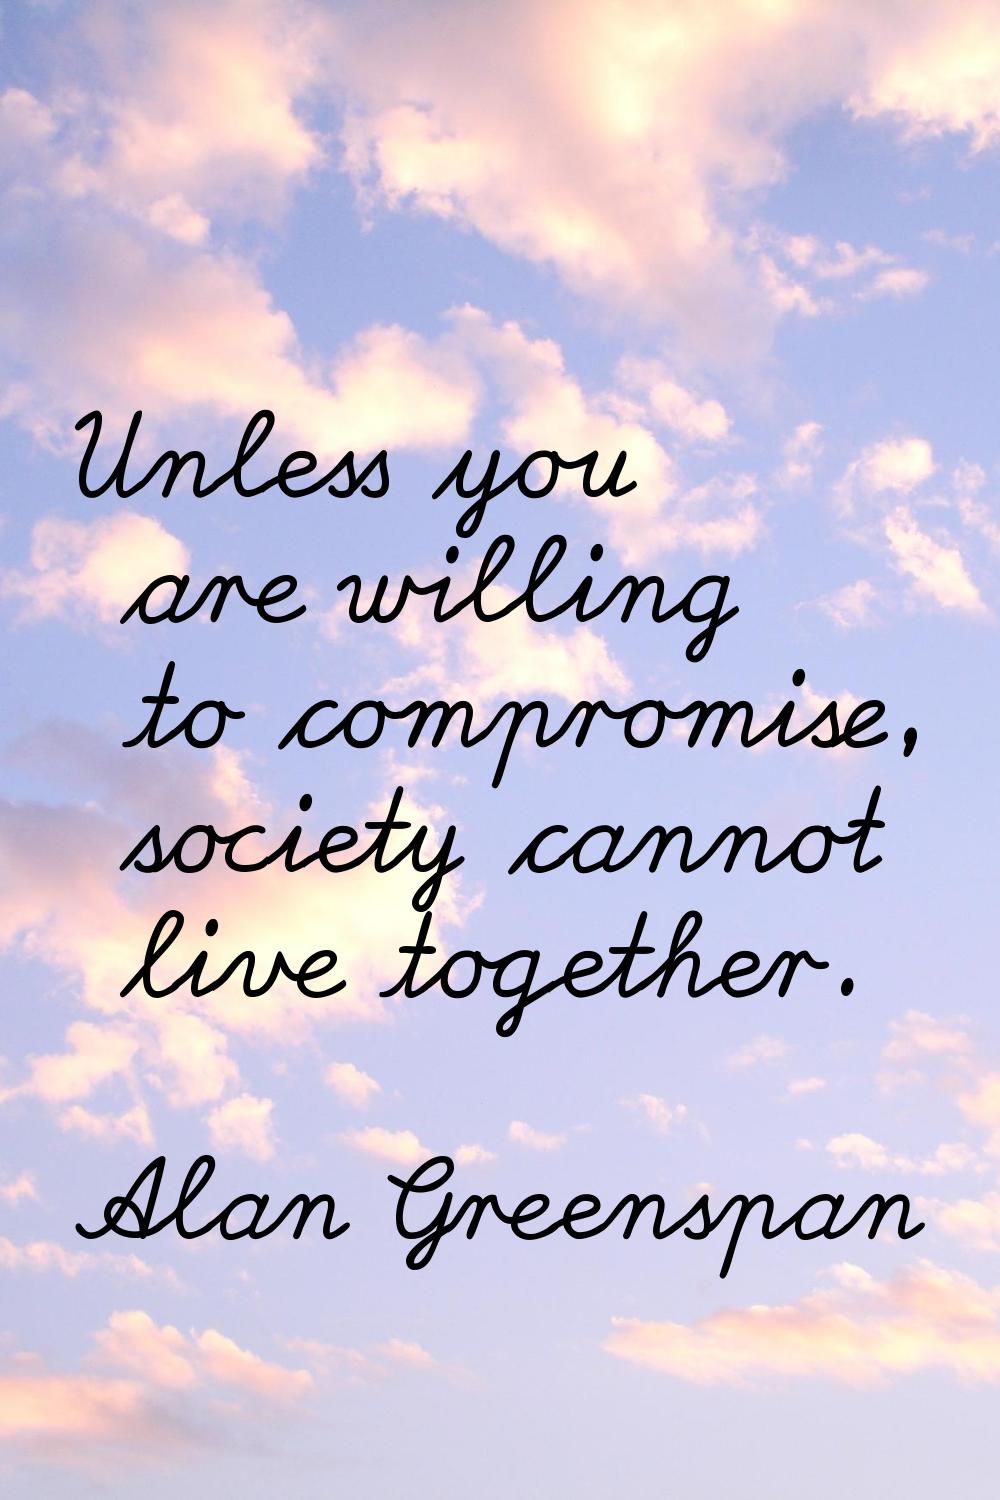 Unless you are willing to compromise, society cannot live together.